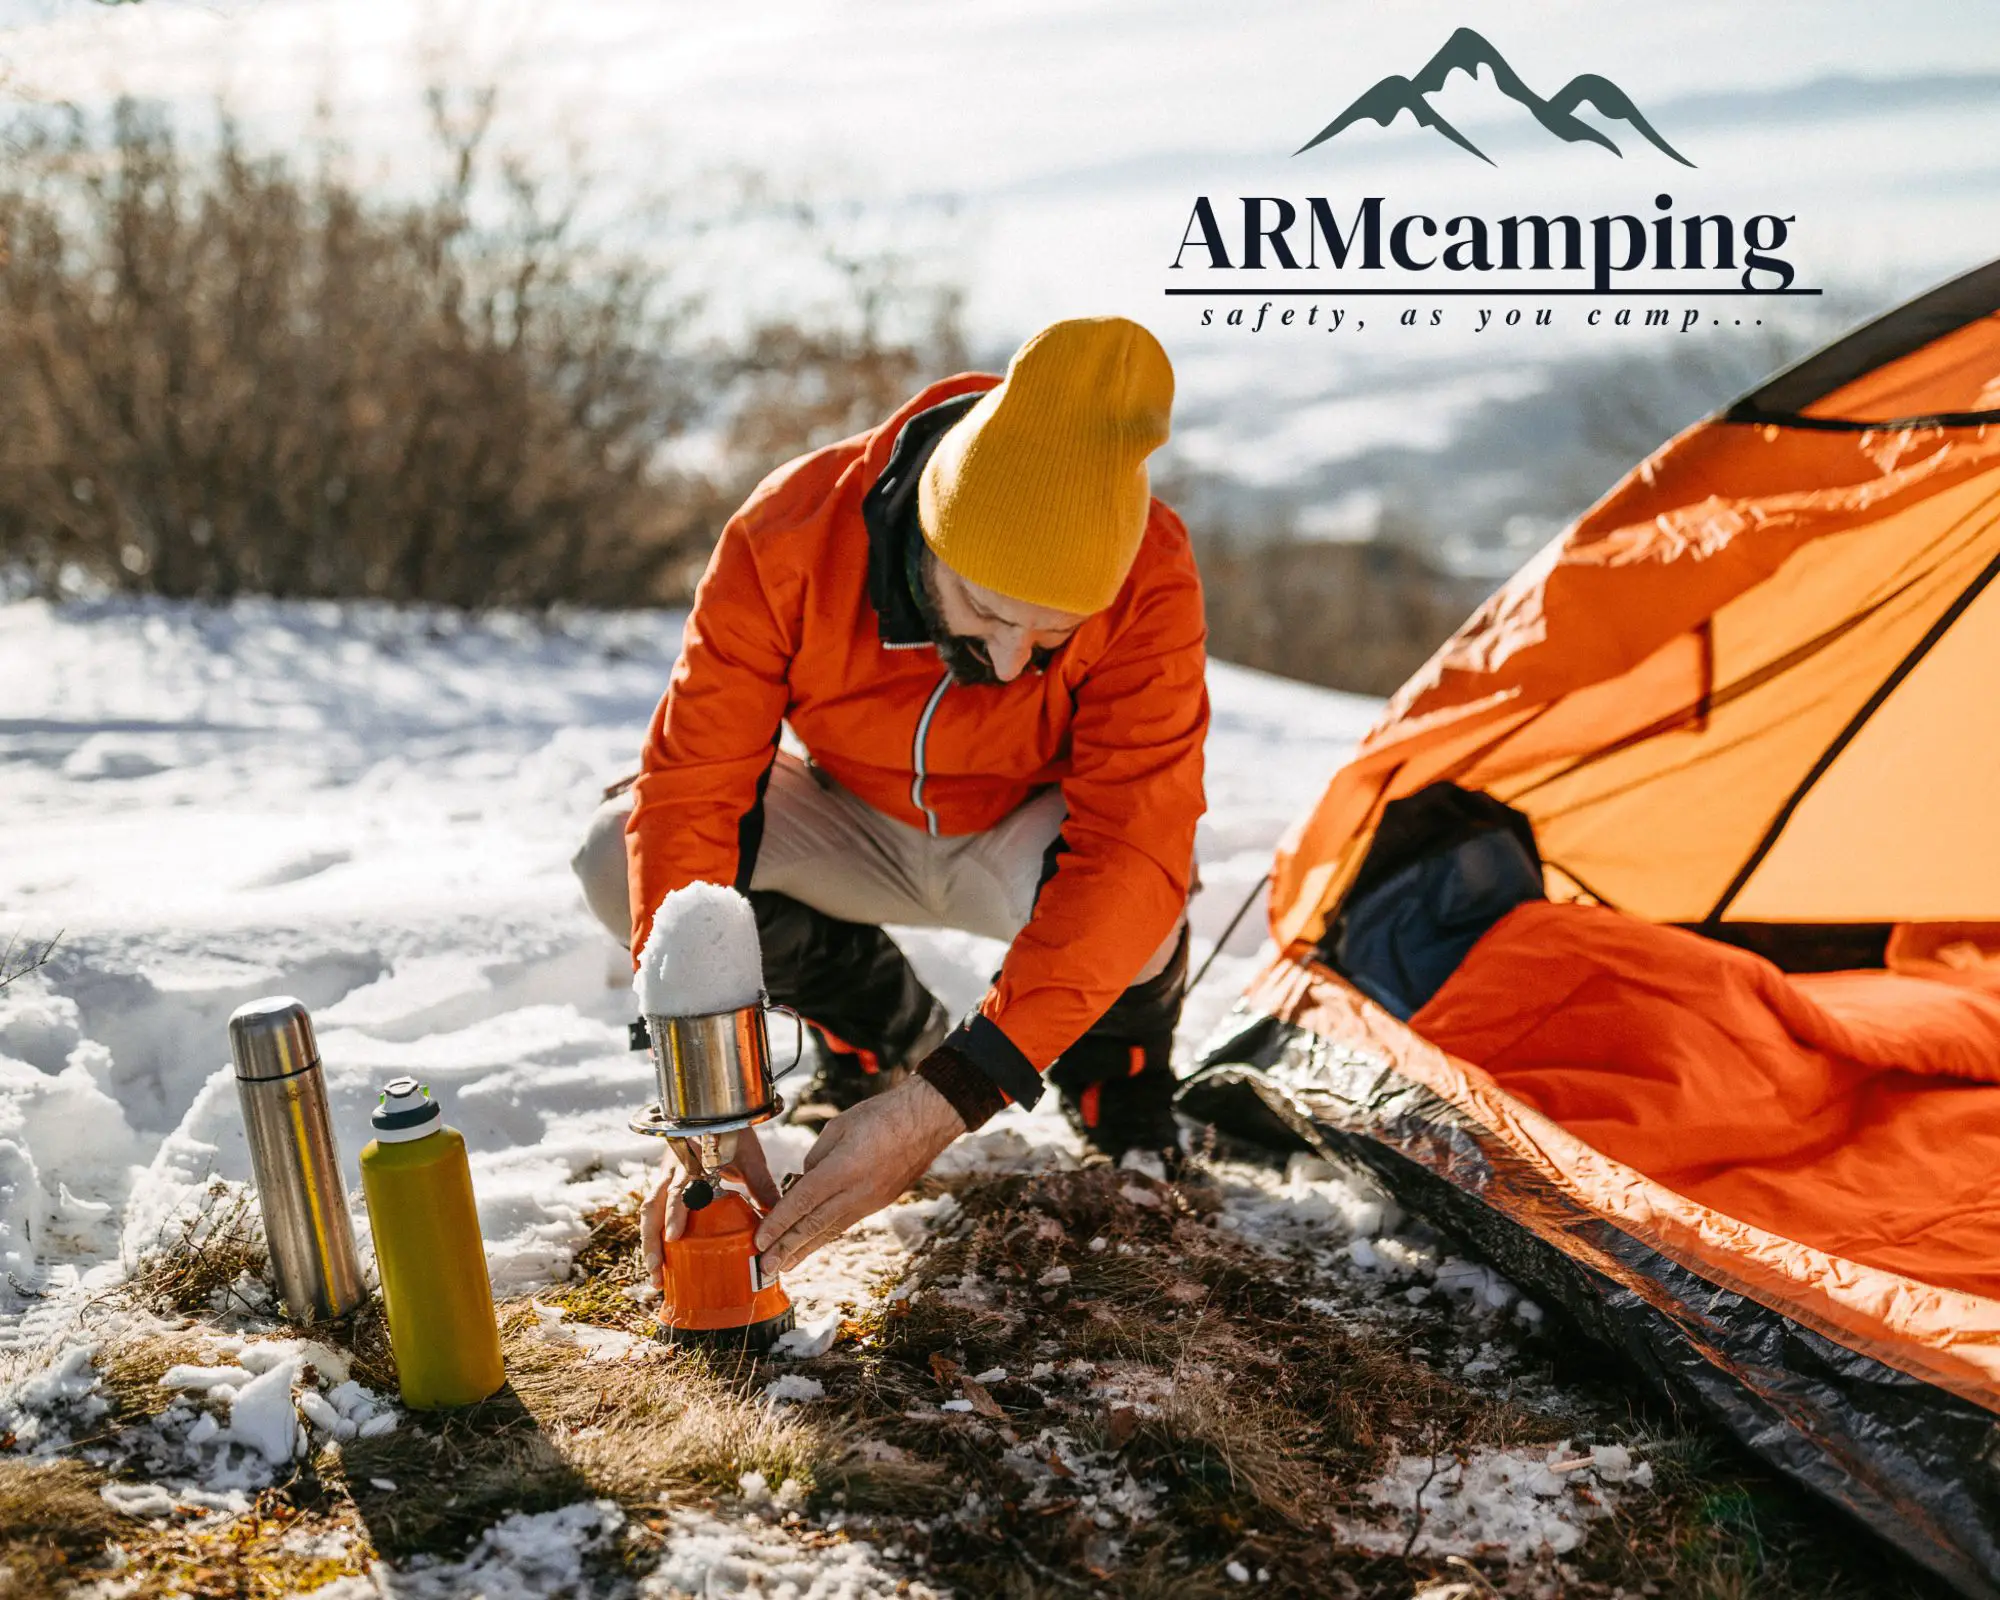 How To Use A Camp Stove And How To Practice Stove Safety